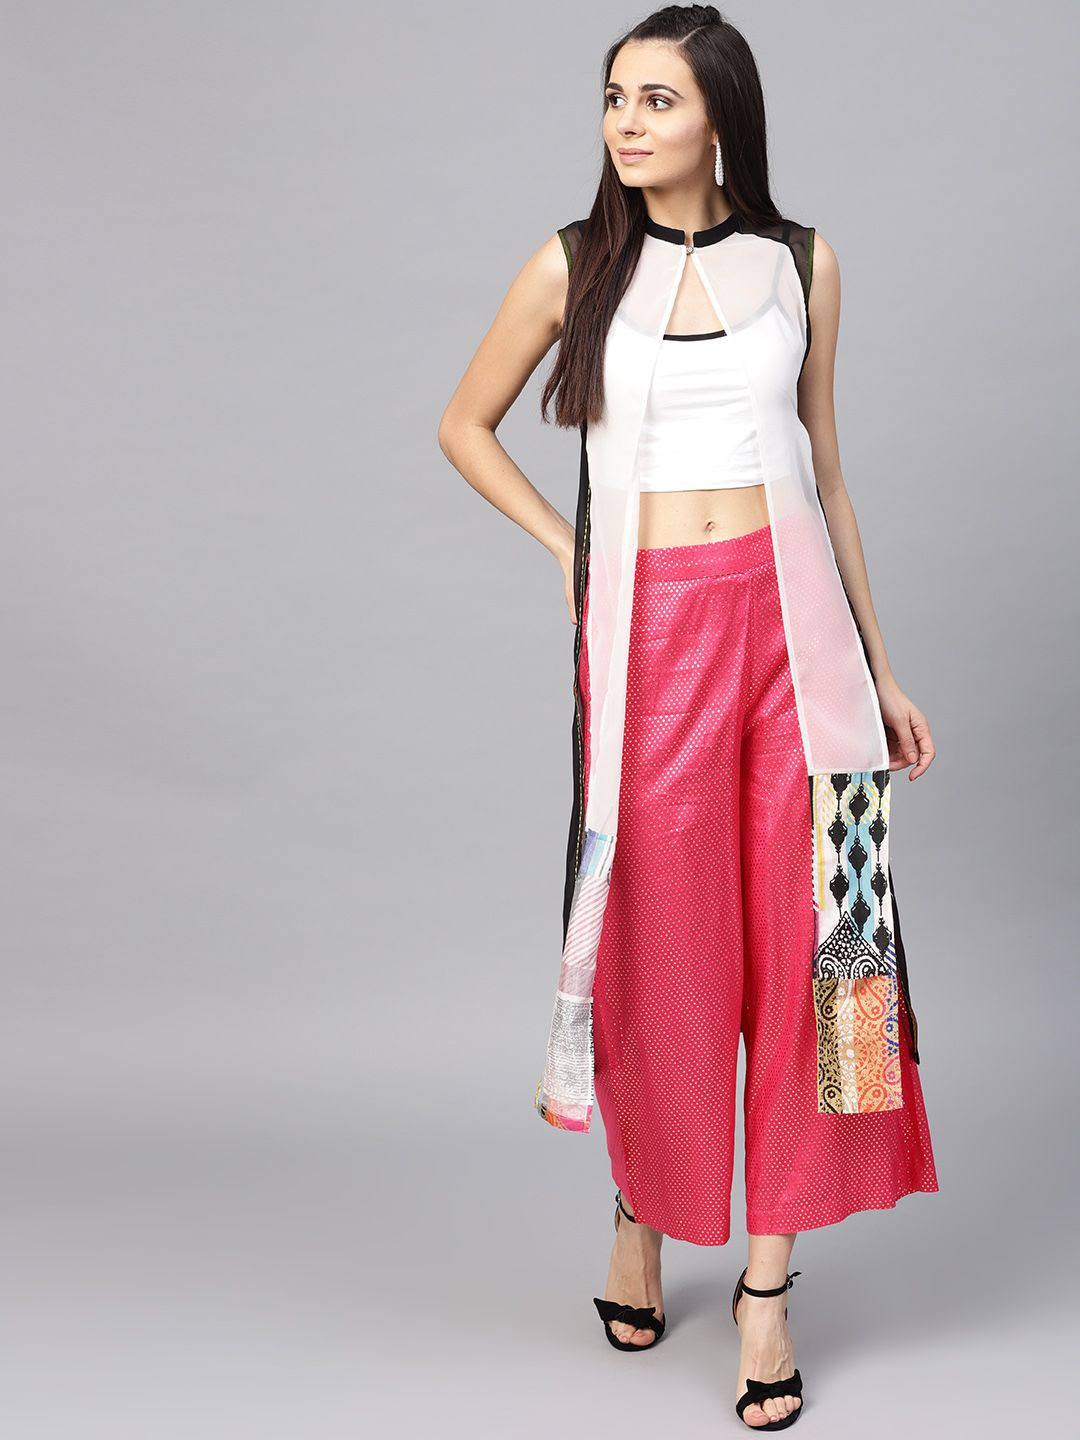 Thefe86 Crop Top With Skirt And Long Shrug Thedelhidawn Com